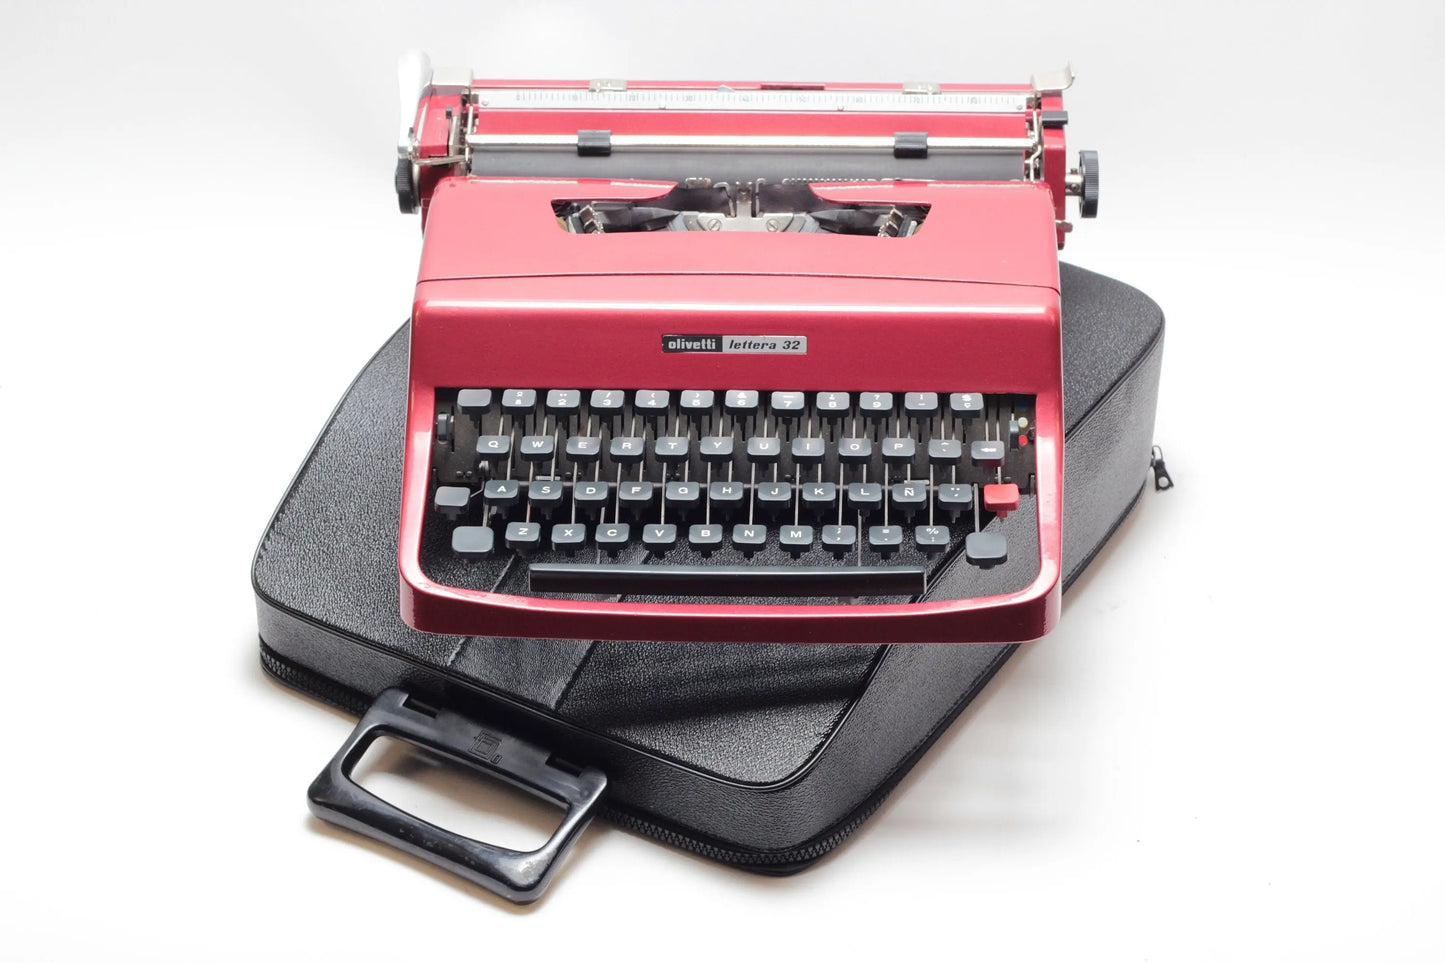 Limited Edition Olivetti Lettera 32 Coral Red Typewriter, Vintage, Manual Portable, Professionally Serviced by Typewriter.Company - ElGranero Typewriter.Company